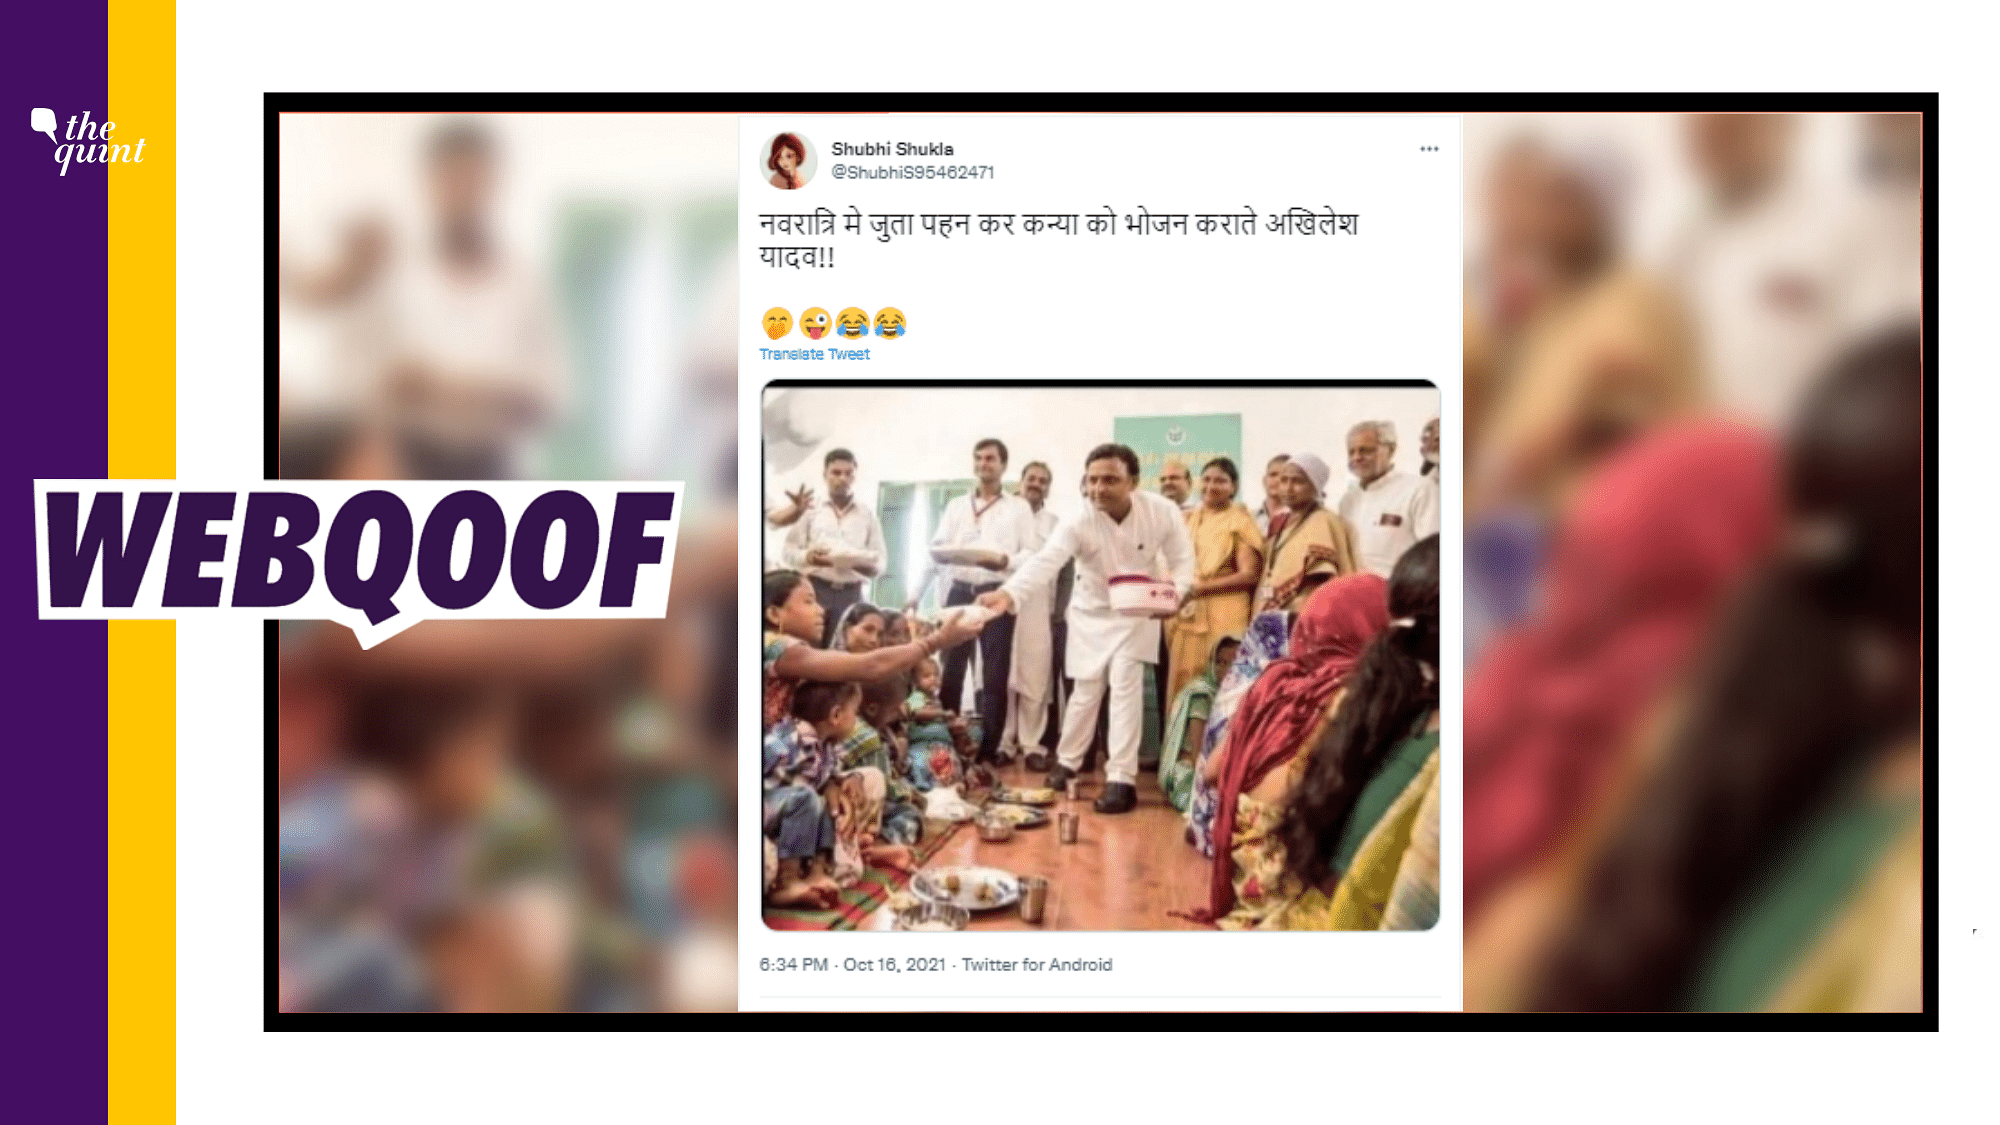 <div class="paragraphs"><p>An old photo of Akhilesh Yadav was shared to claim that he wore shoes while serving food during Navratri.</p></div>